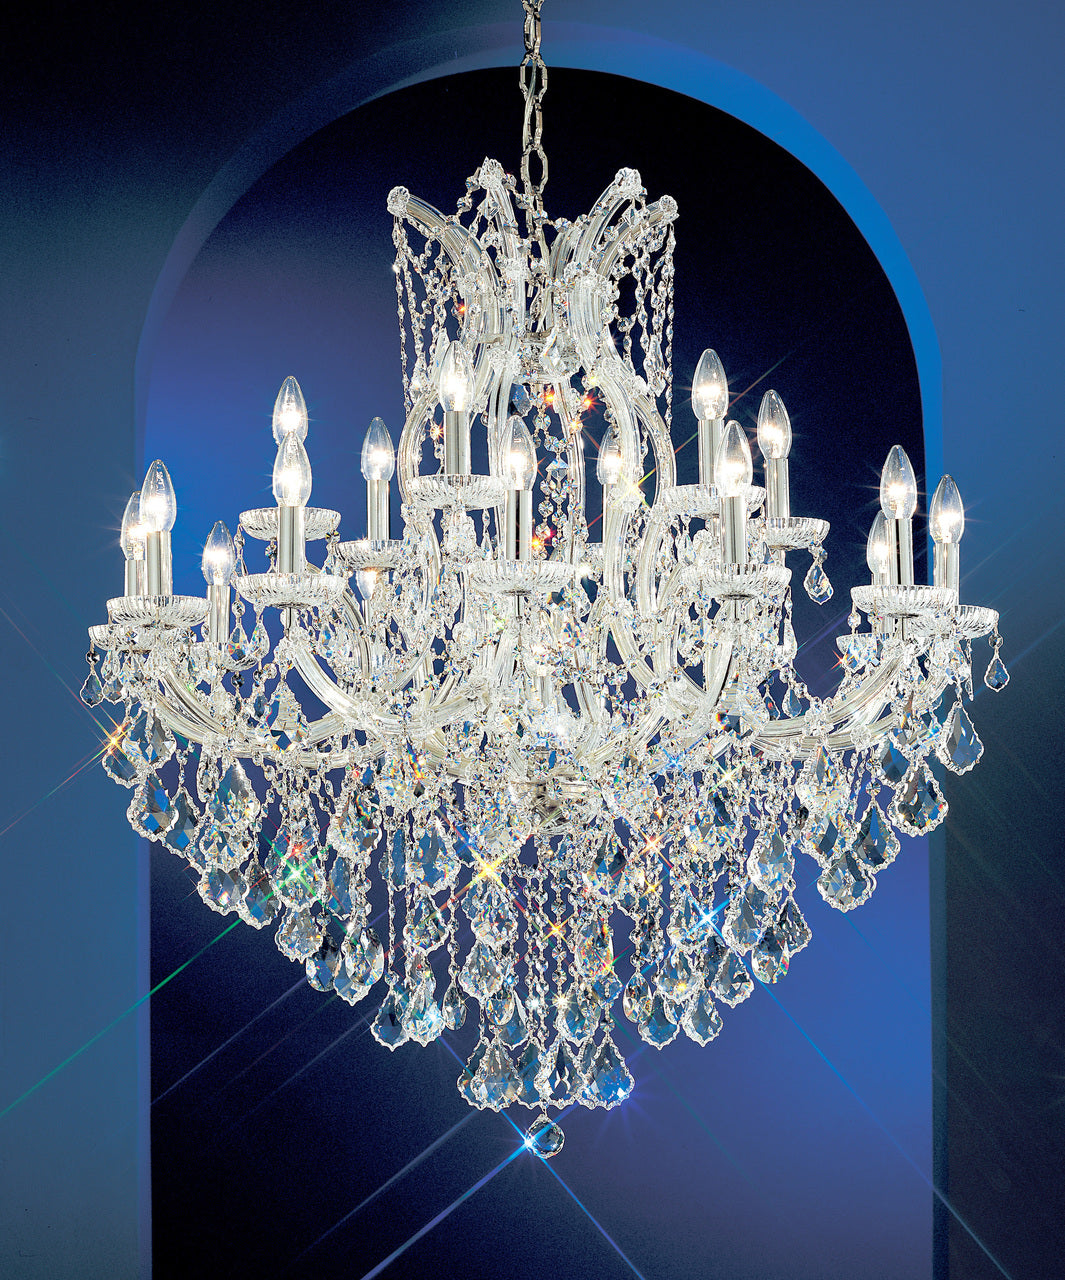 Classic Lighting 8138 CH S Maria Theresa Traditional Crystal Chandelier in Chrome (Imported from Italy)